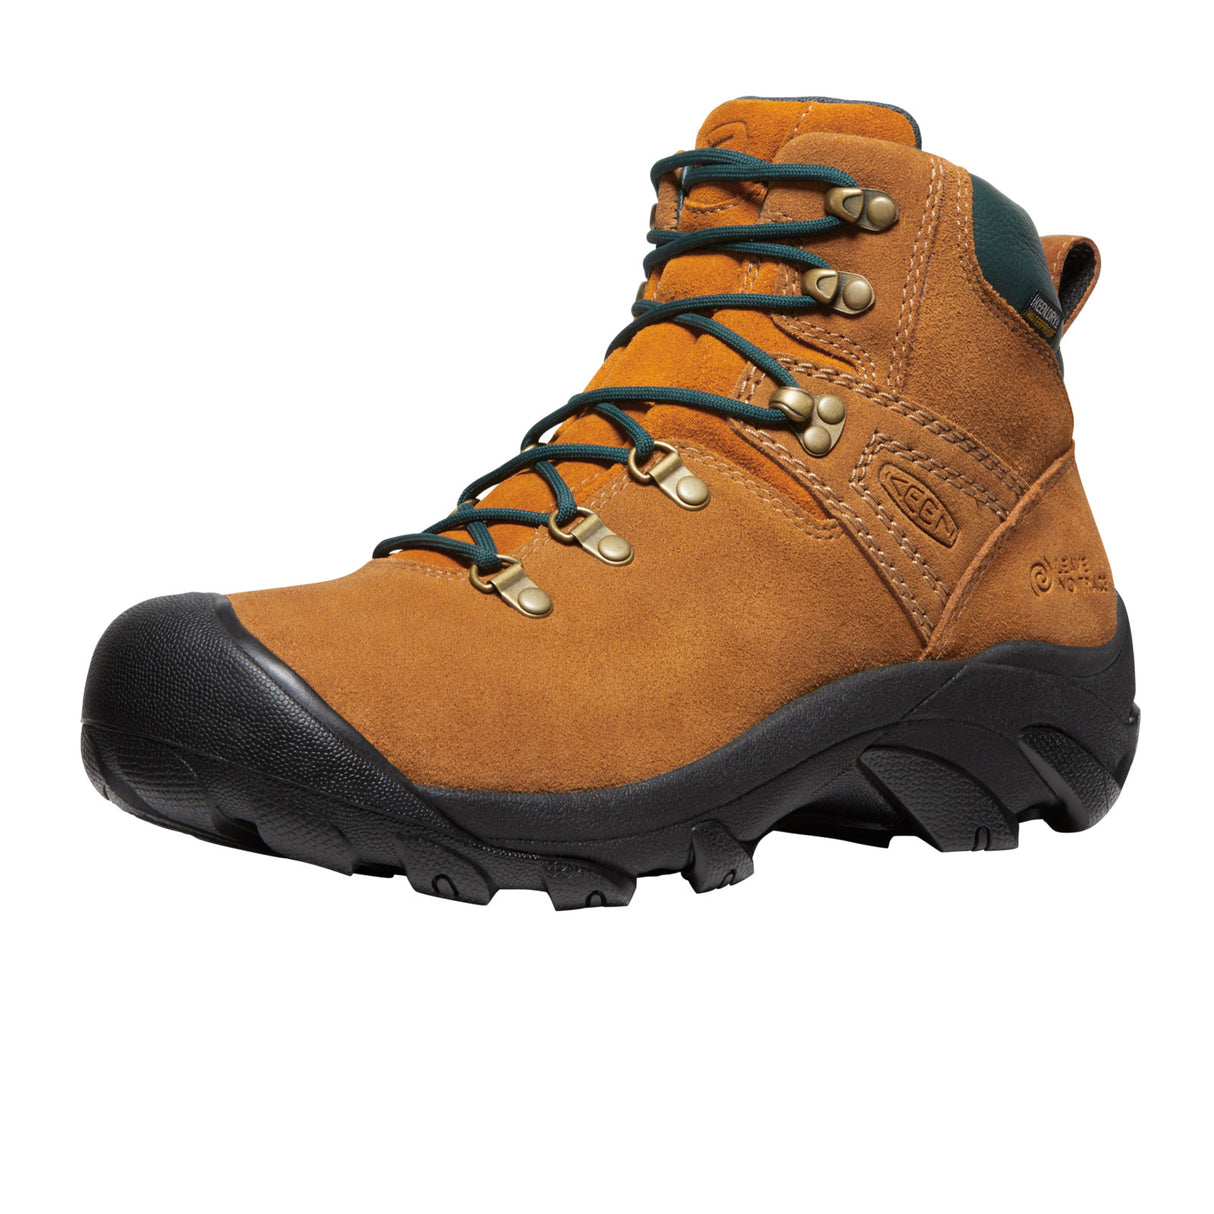 Keen Pyrenees Mid Hiking Boot (Men) - Maple/Marmalade Boots - Hiking - Mid - The Heel Shoe Fitters